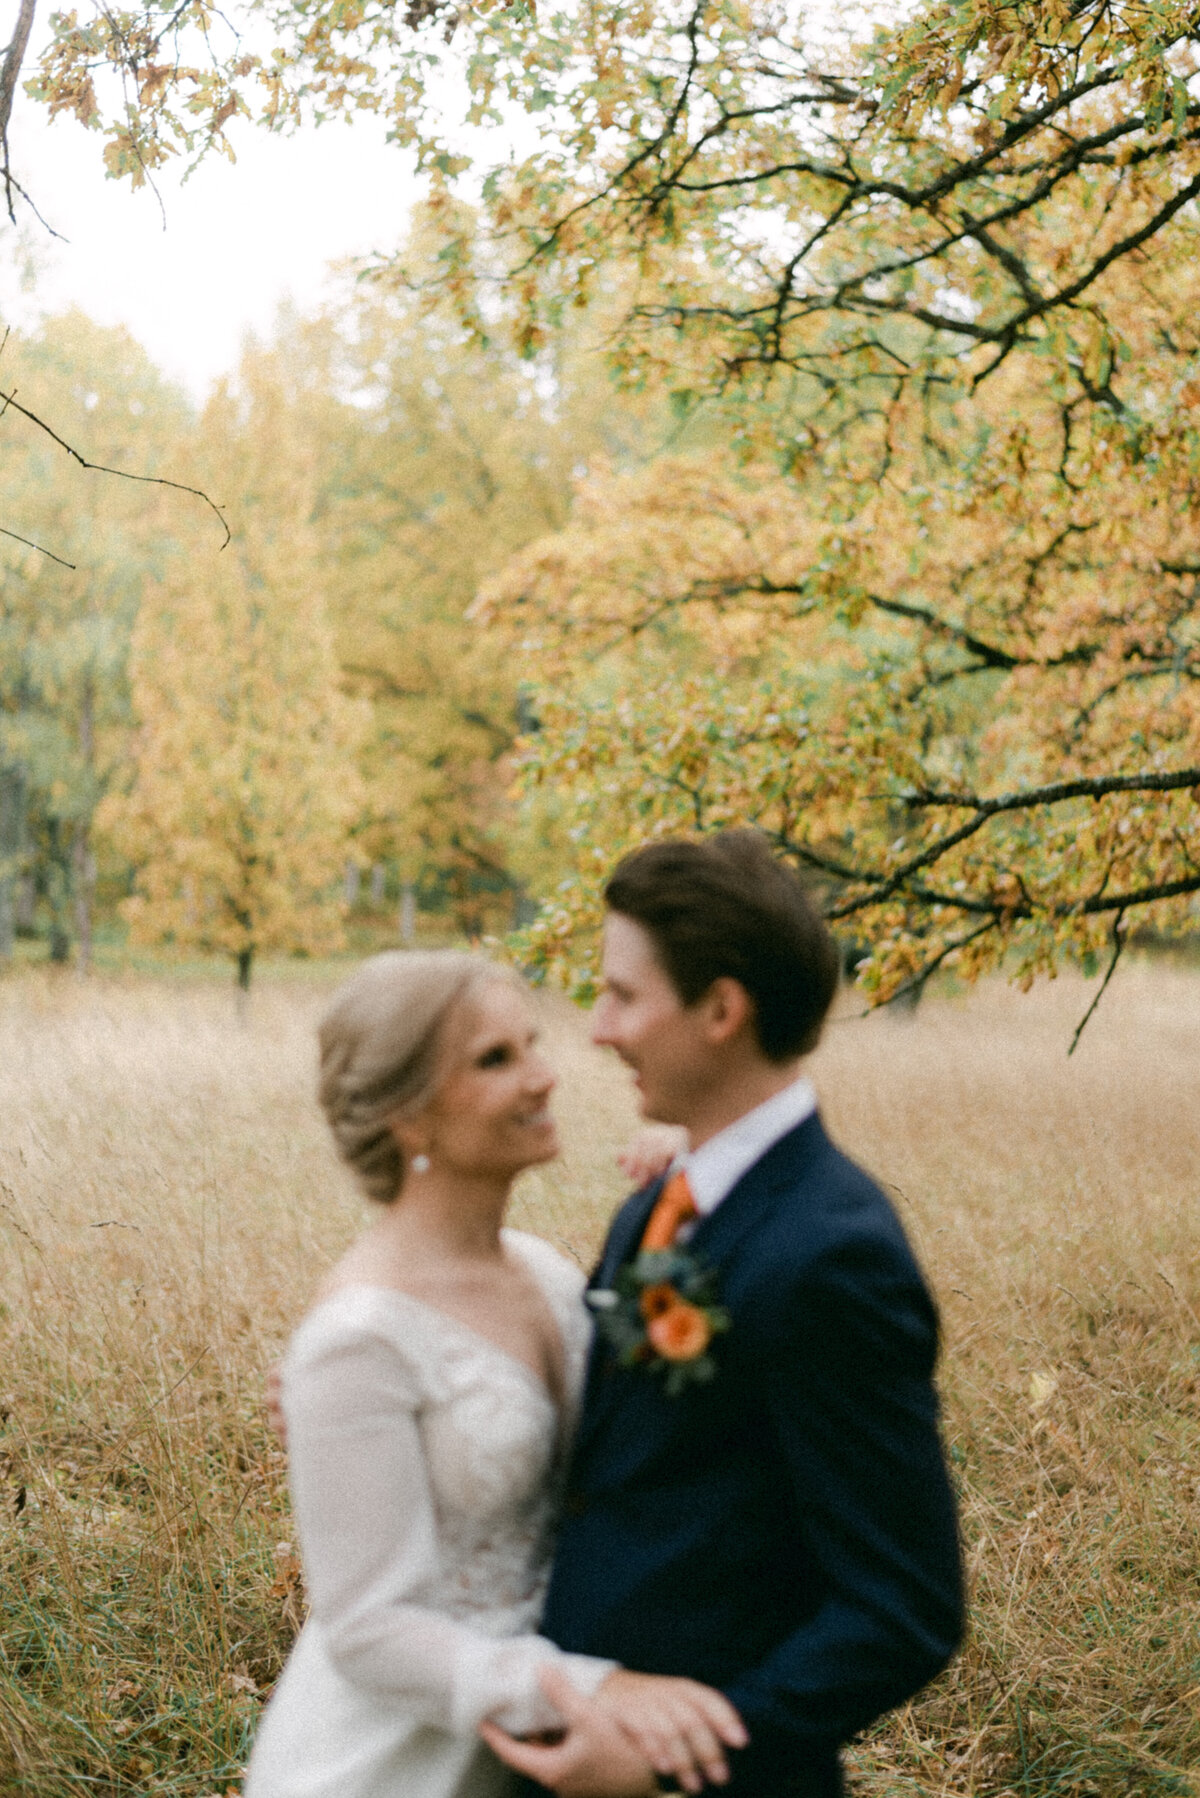 A romantic photograph of a wedding couple in the autumn in Oitbacka gård captured by wedding photographer Hannika Gabrielsson in Finland